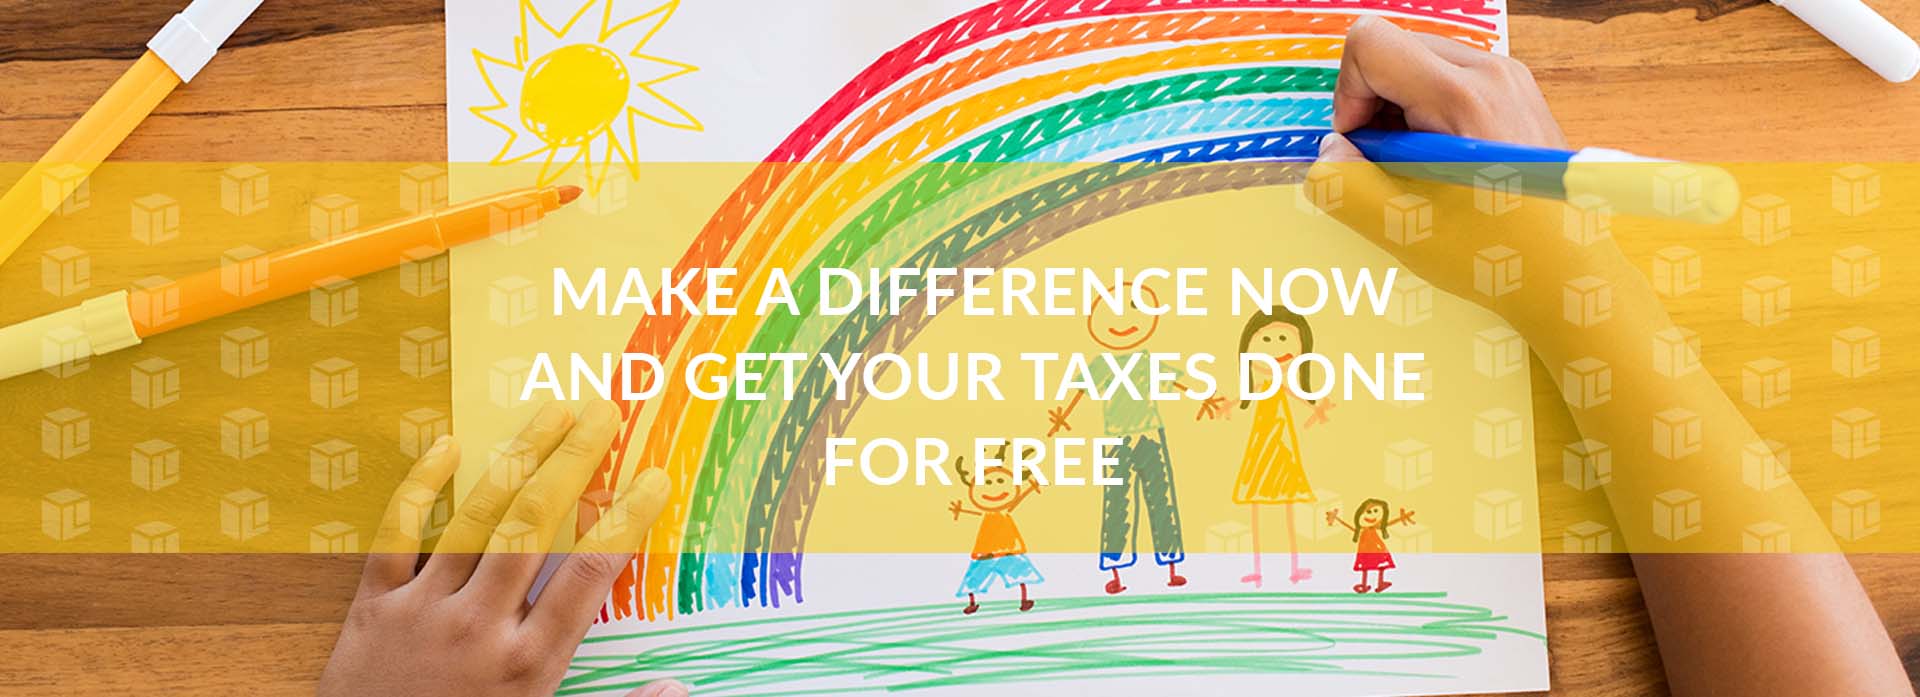 Make A Difference Now And Get Your Taxes Done For Free